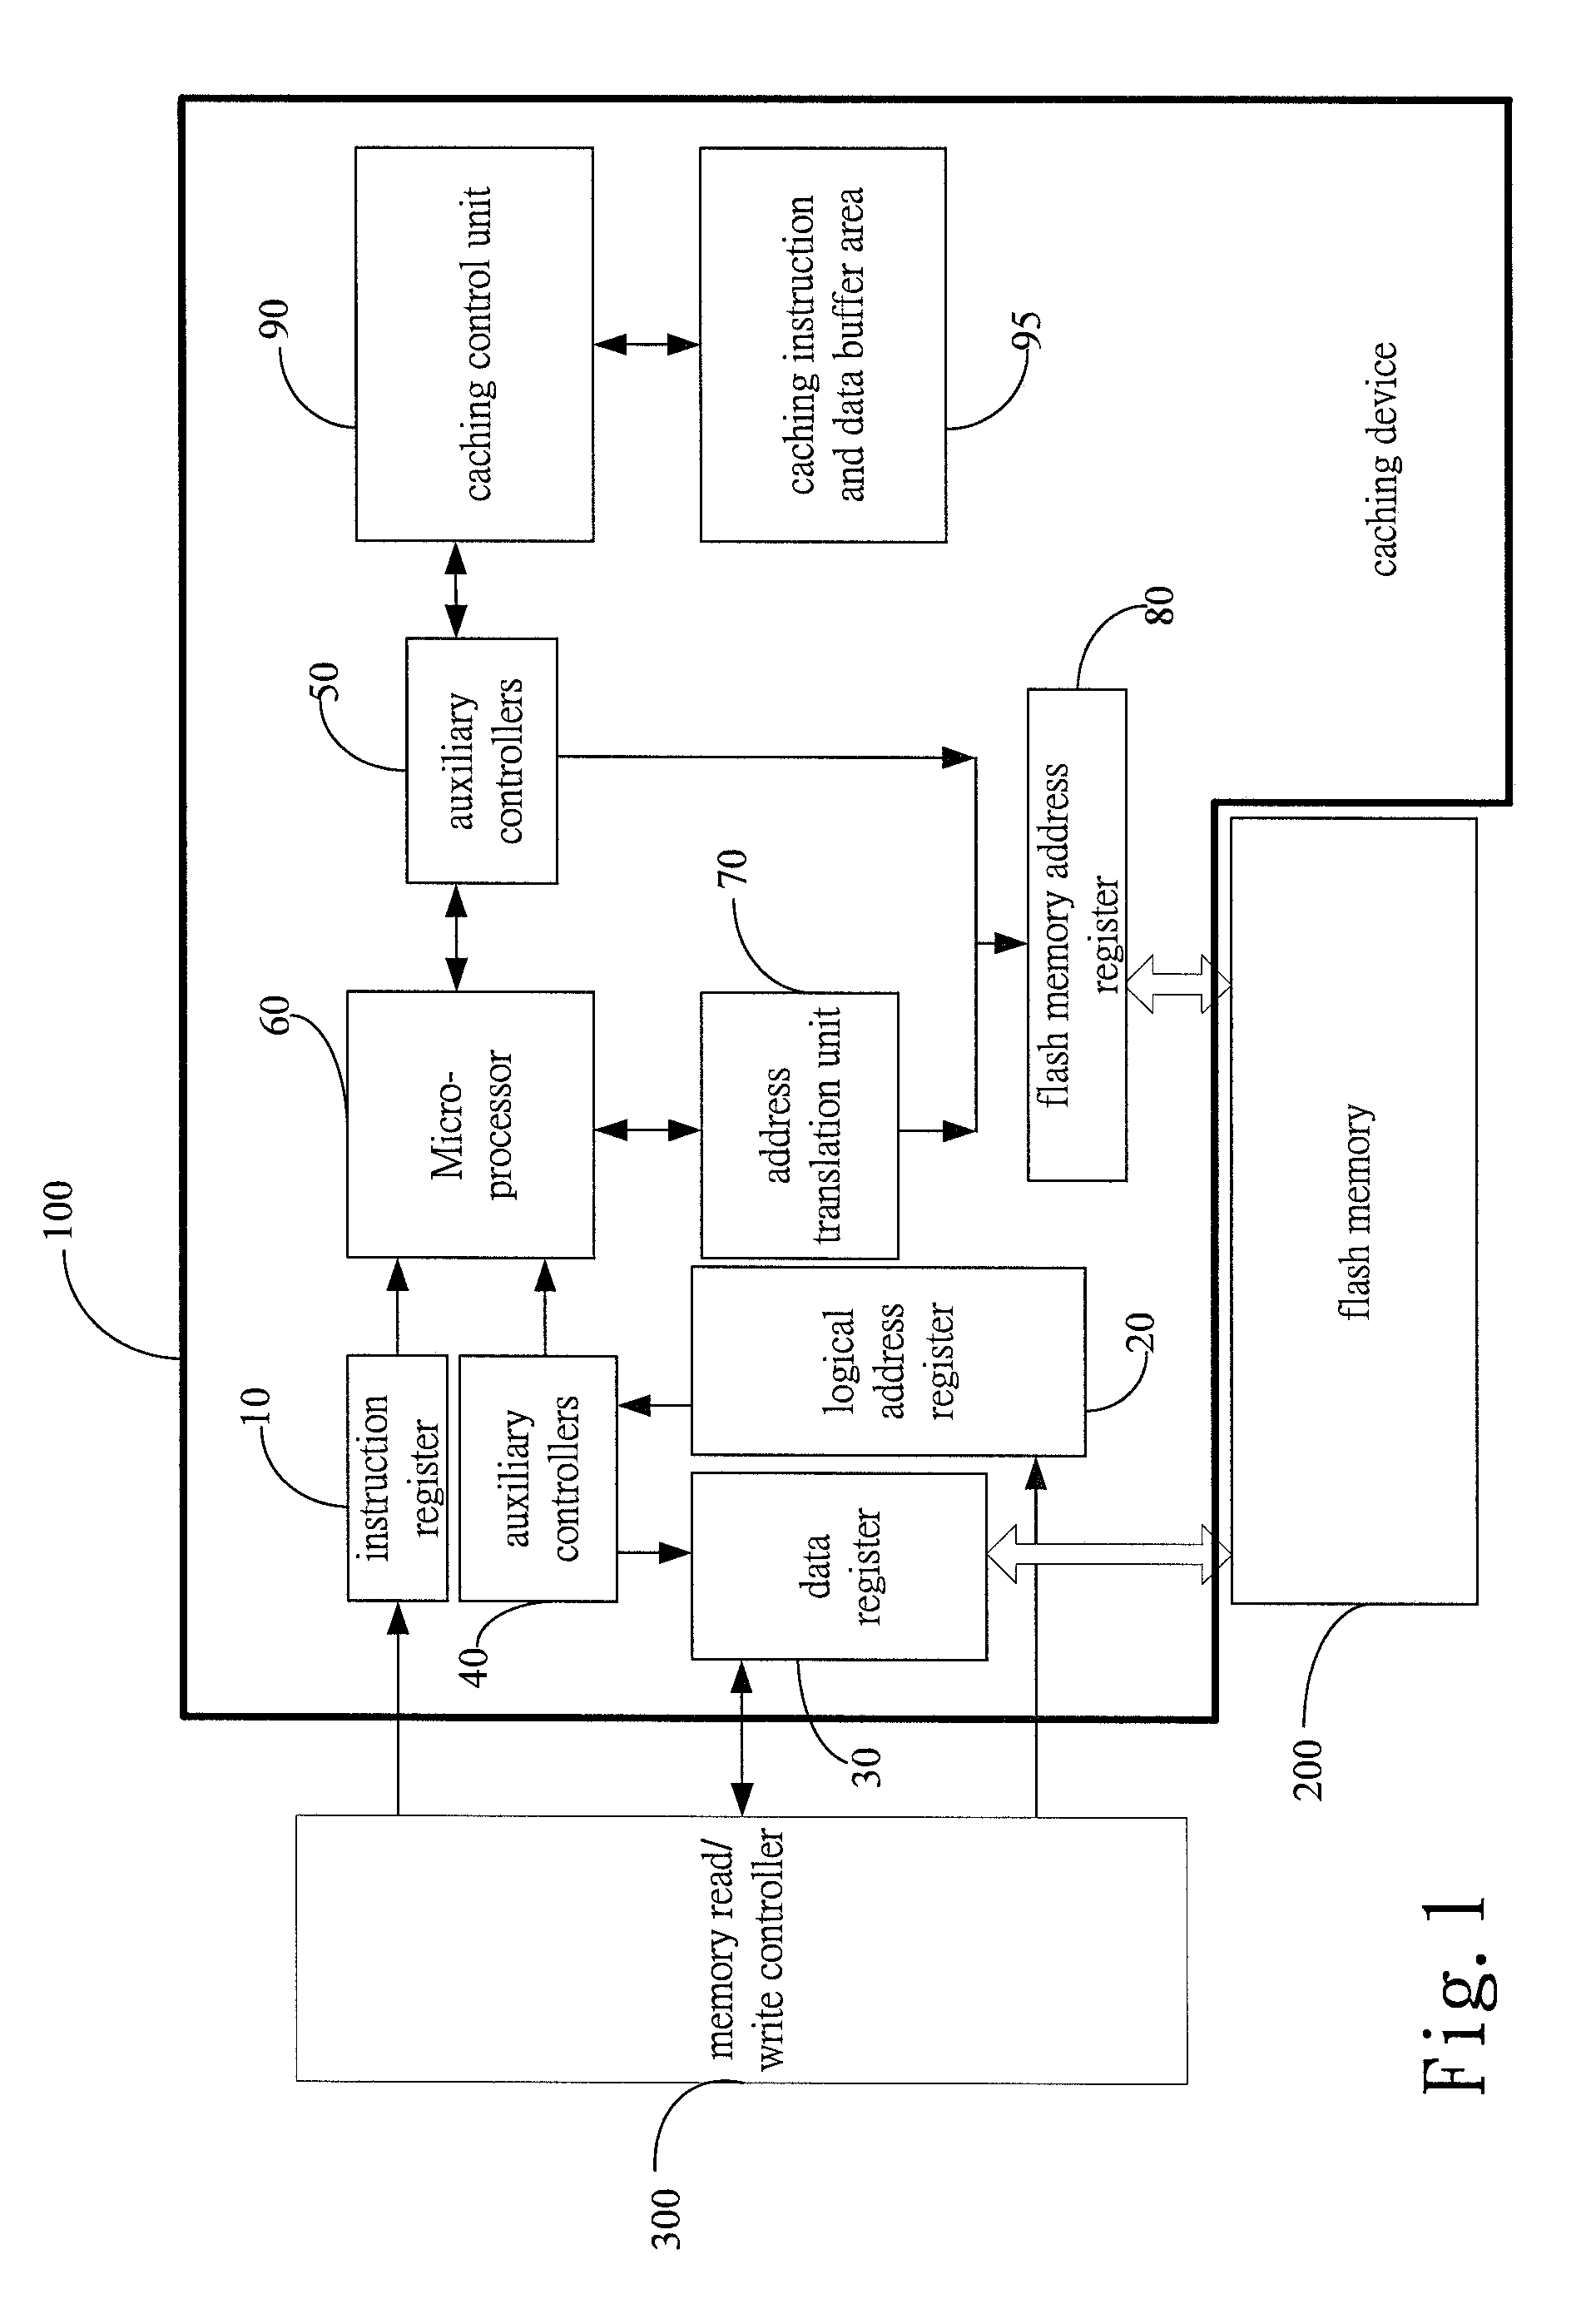 Caching device for NAND flash translation layer